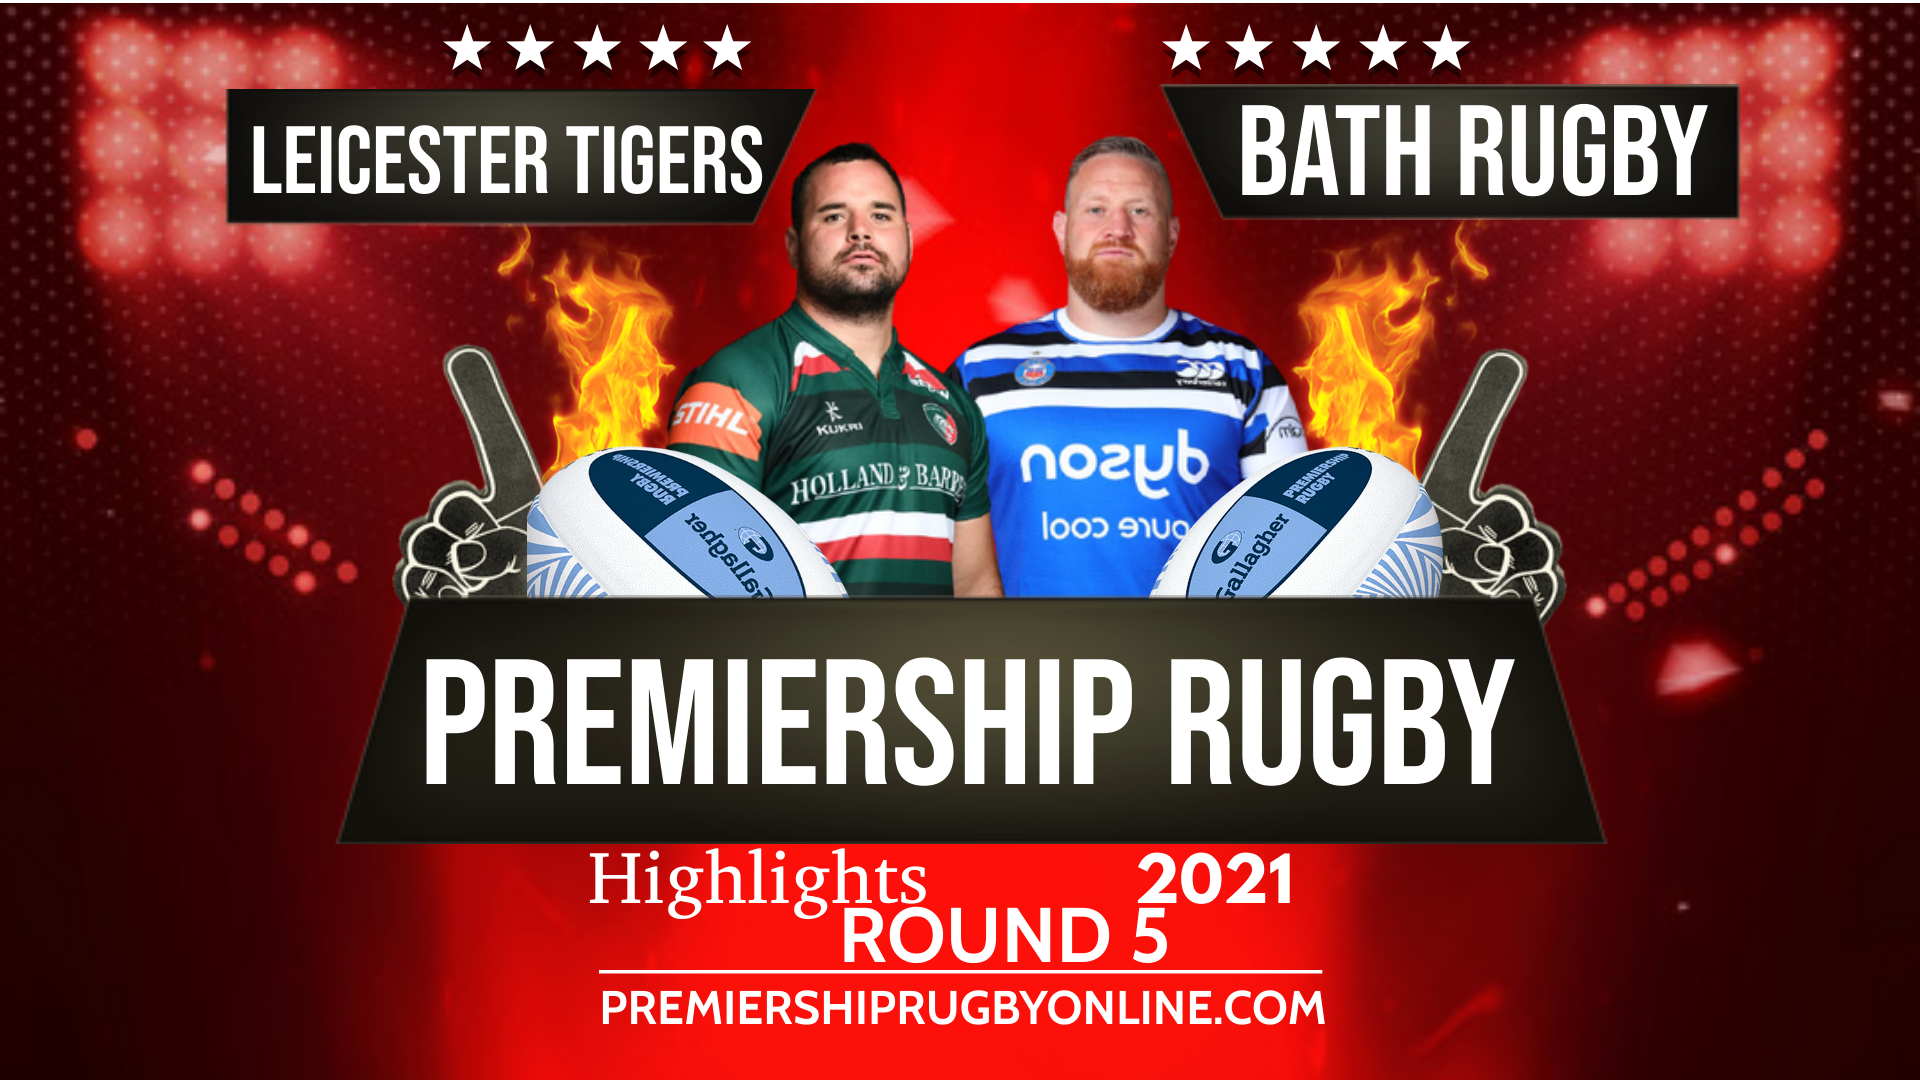 Leicester Tigers Vs Bath Rugby Highlights 2021 RD 5